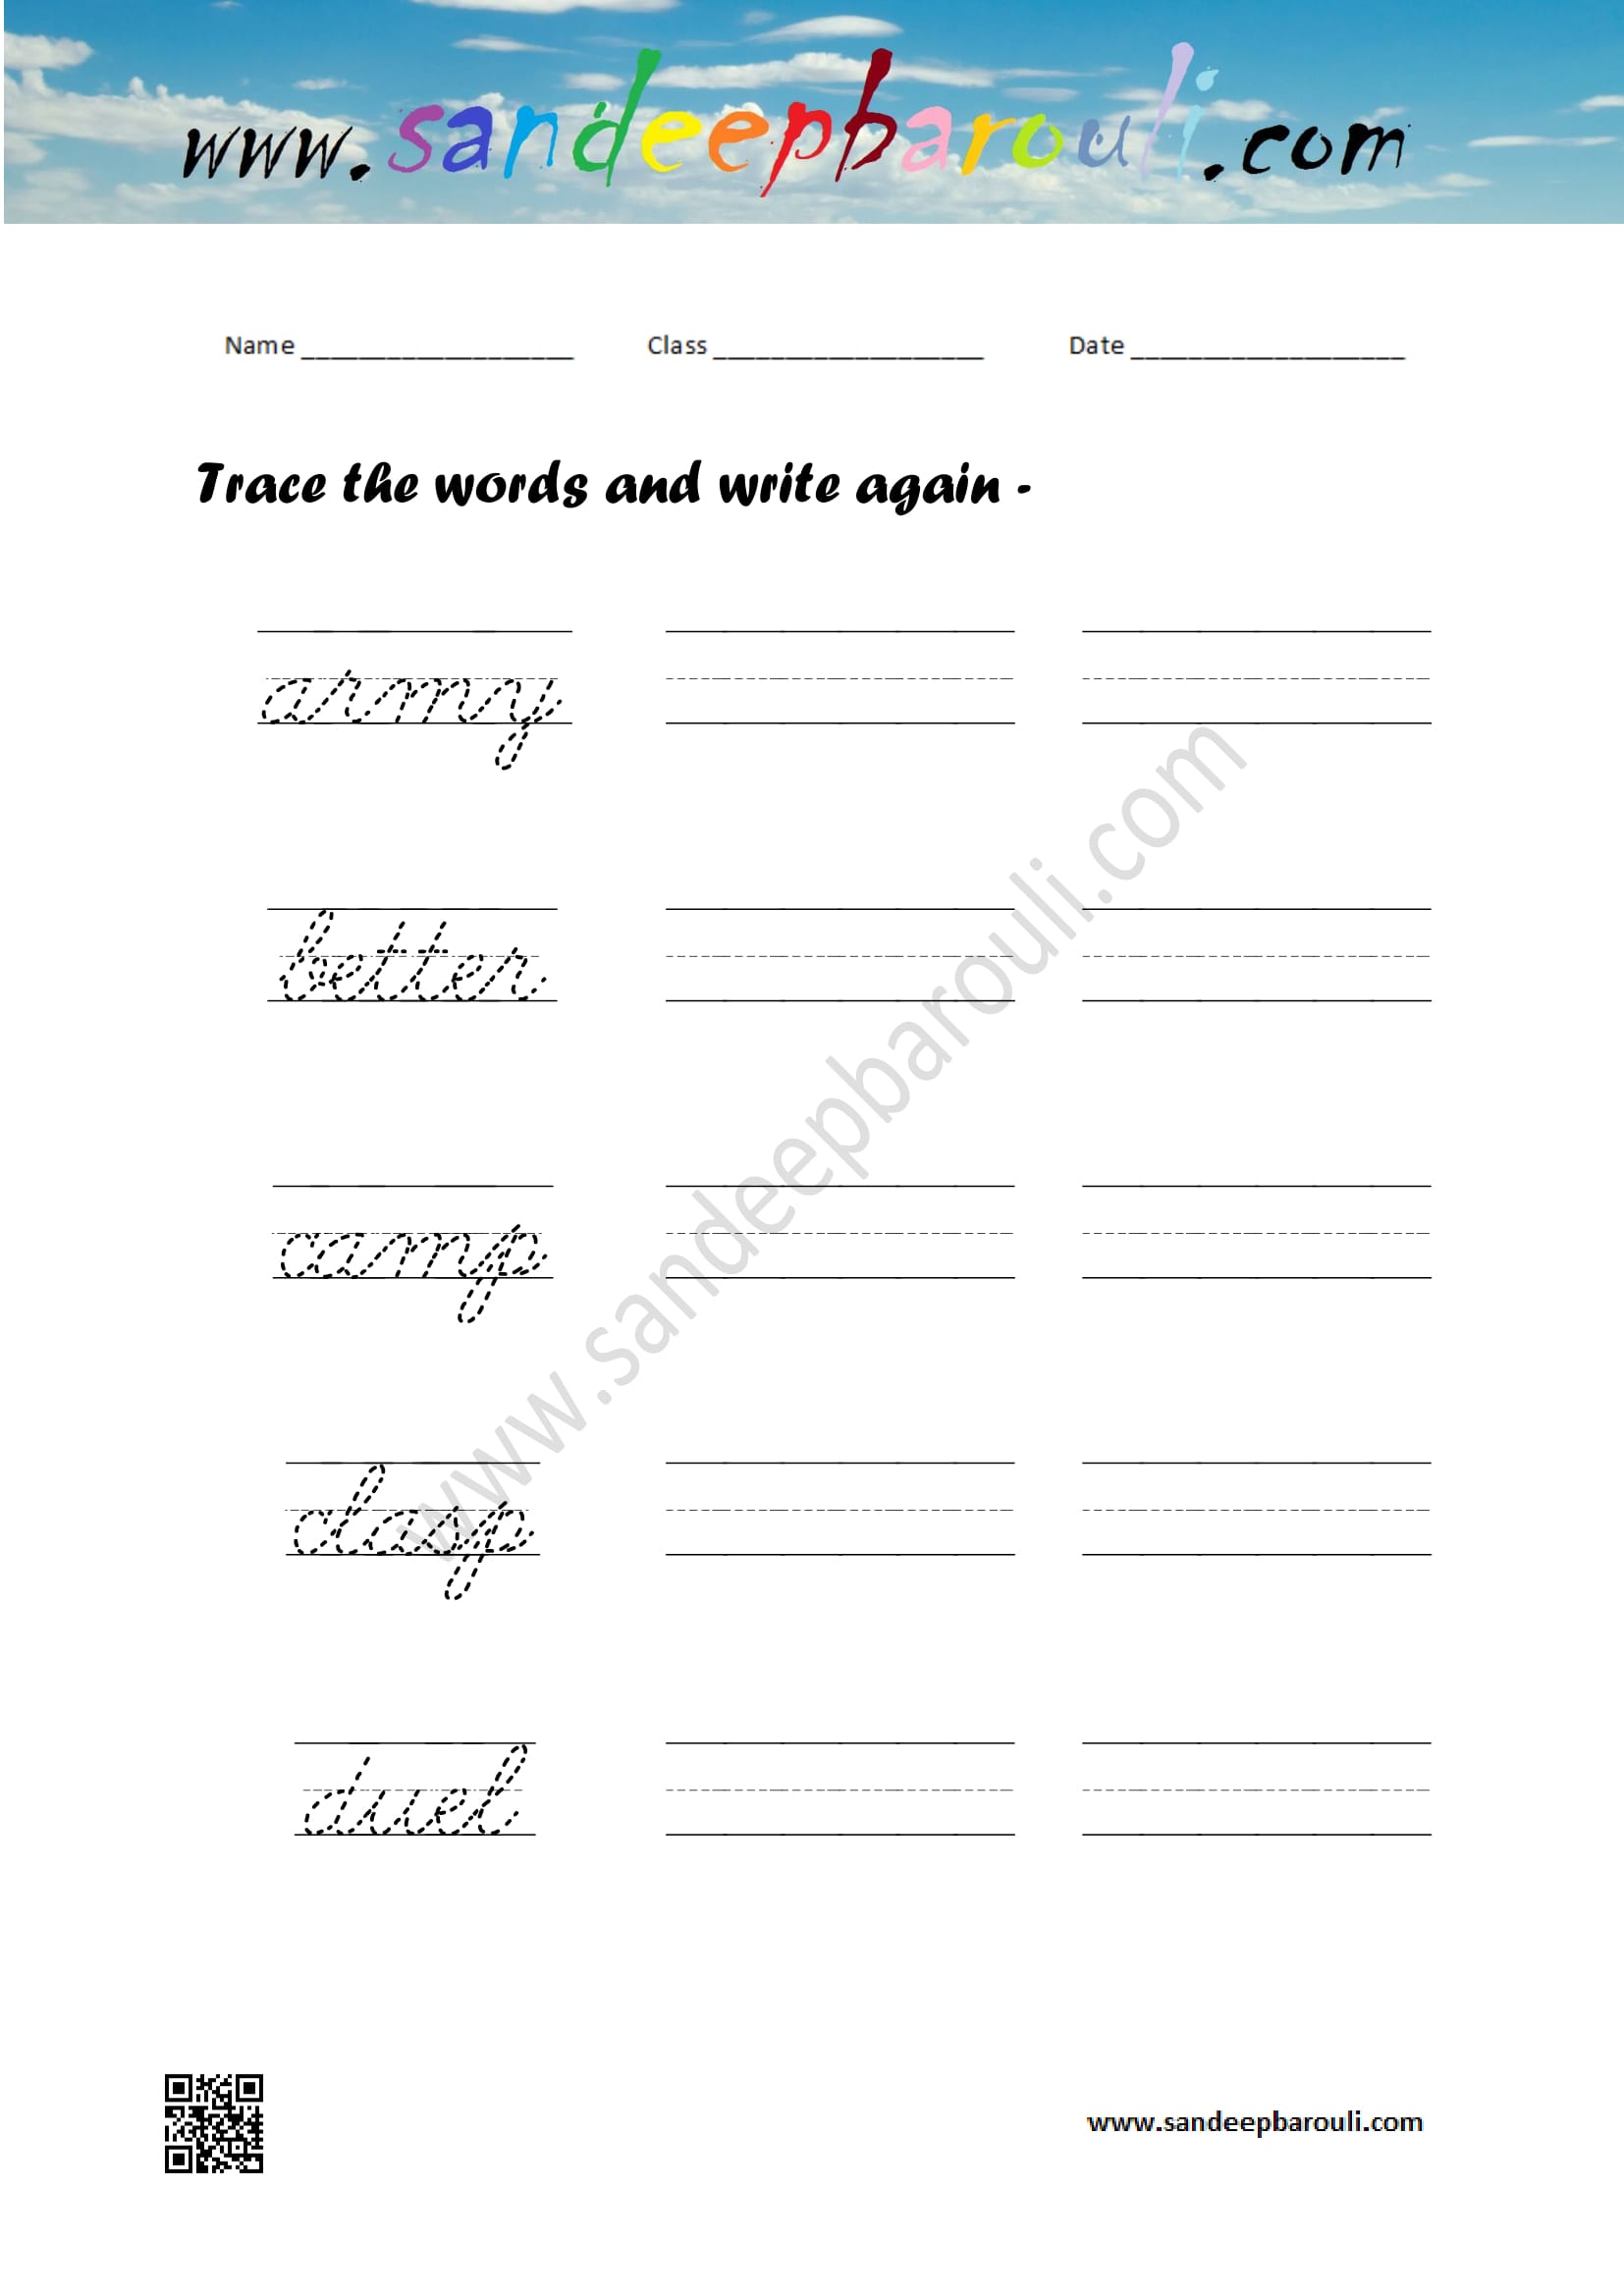 Cursive writing worksheet – trace the words and write again (65)